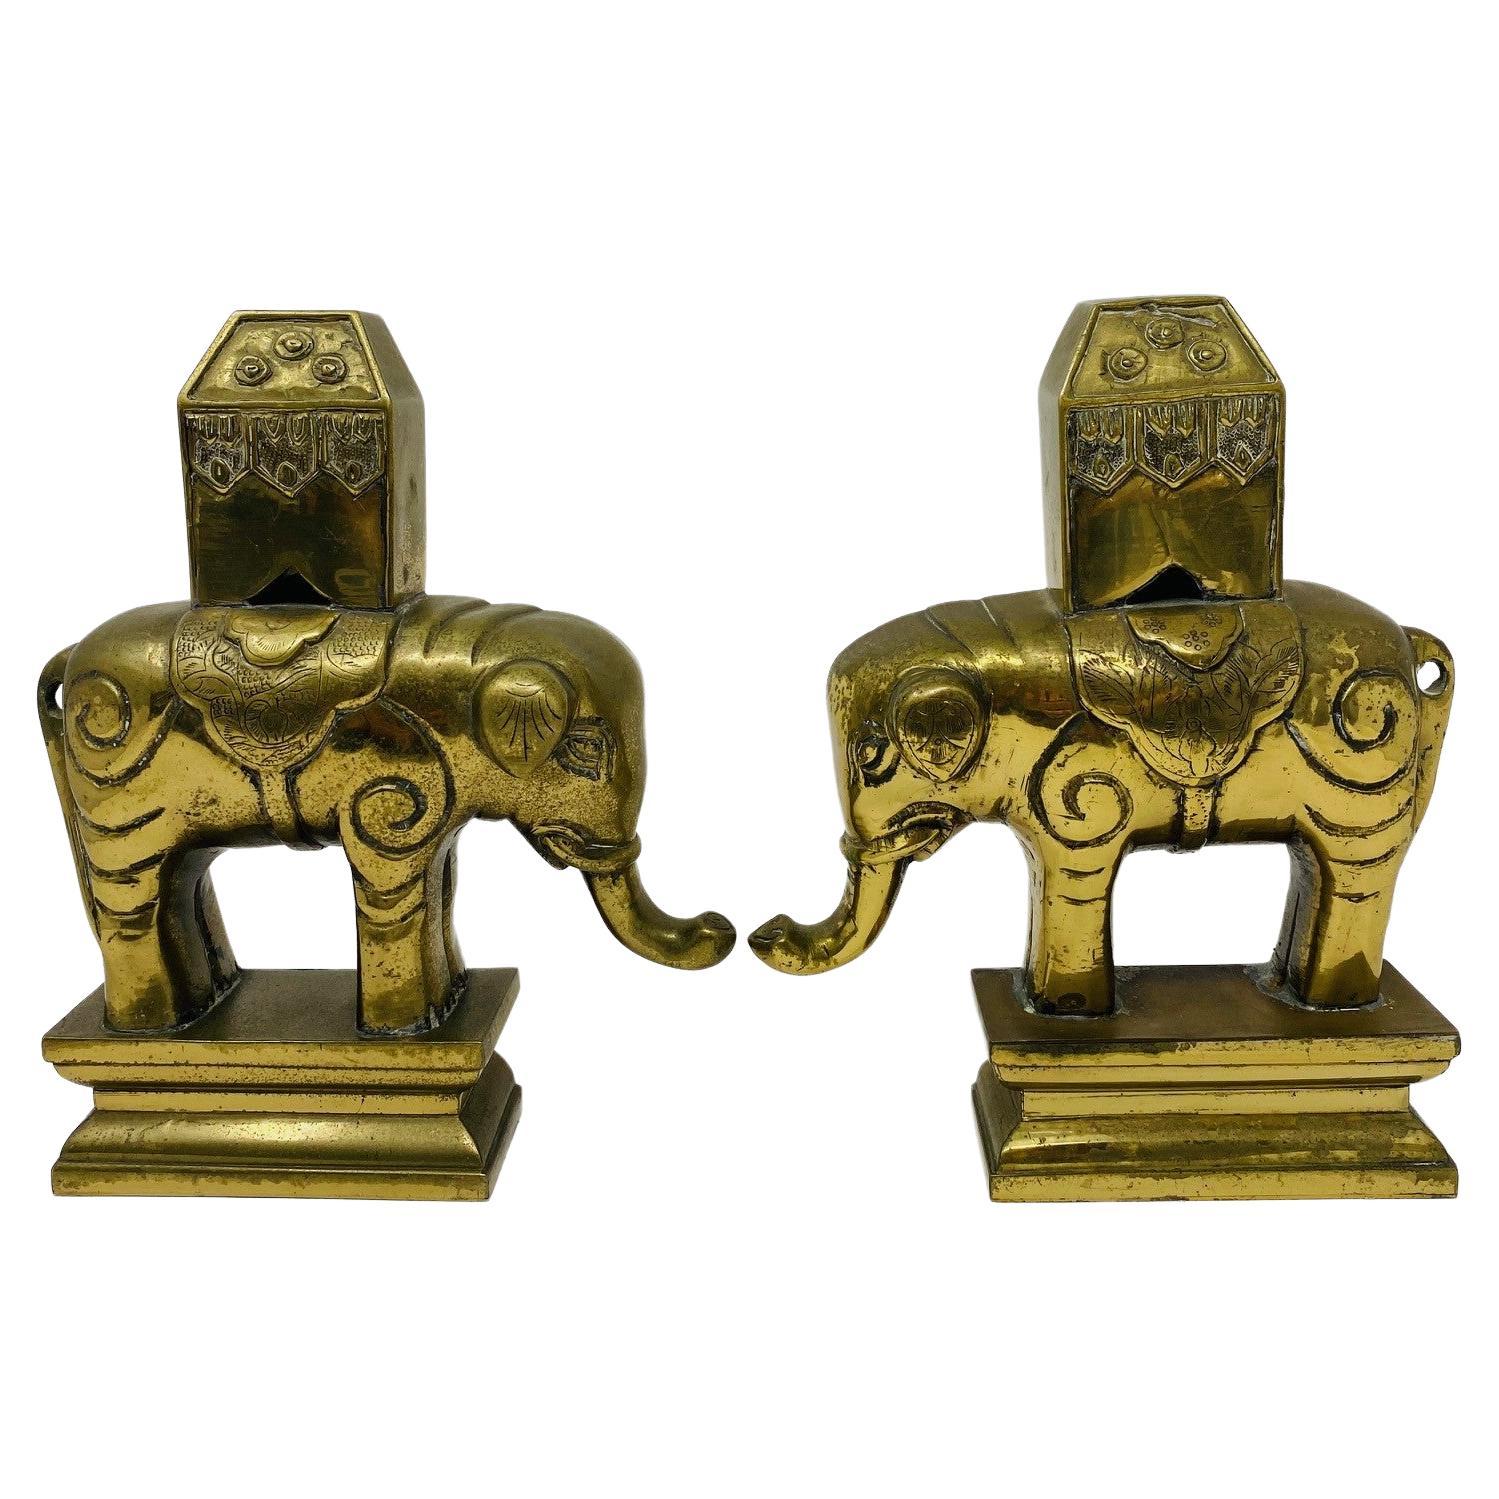 Vintage 1940s Pair of Sculptural Elephant Bookends in Solid Brass For Sale